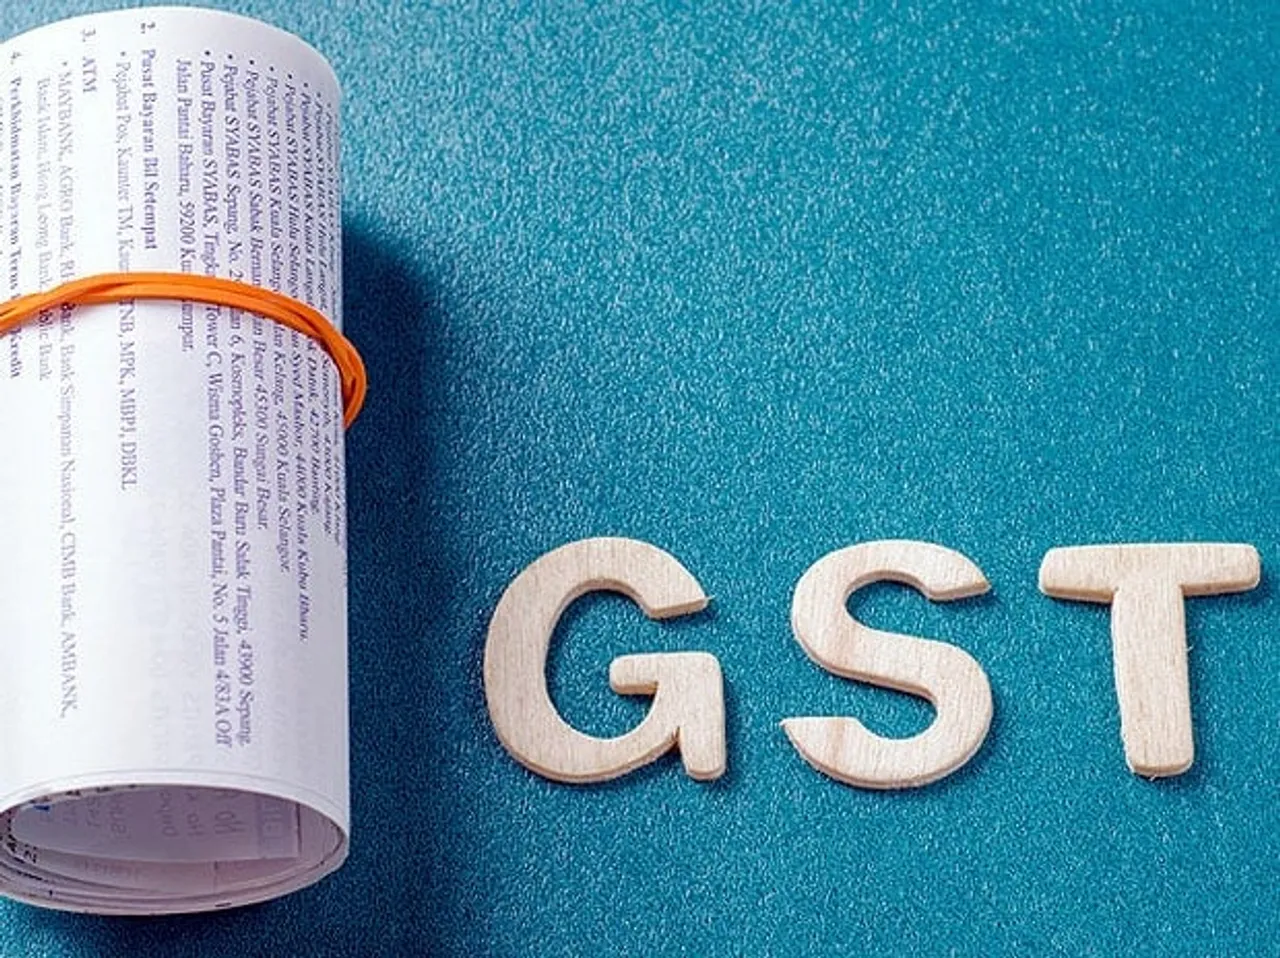 SAP launches ‘GST in a Box’ to make Indian SMEs GST Compliant